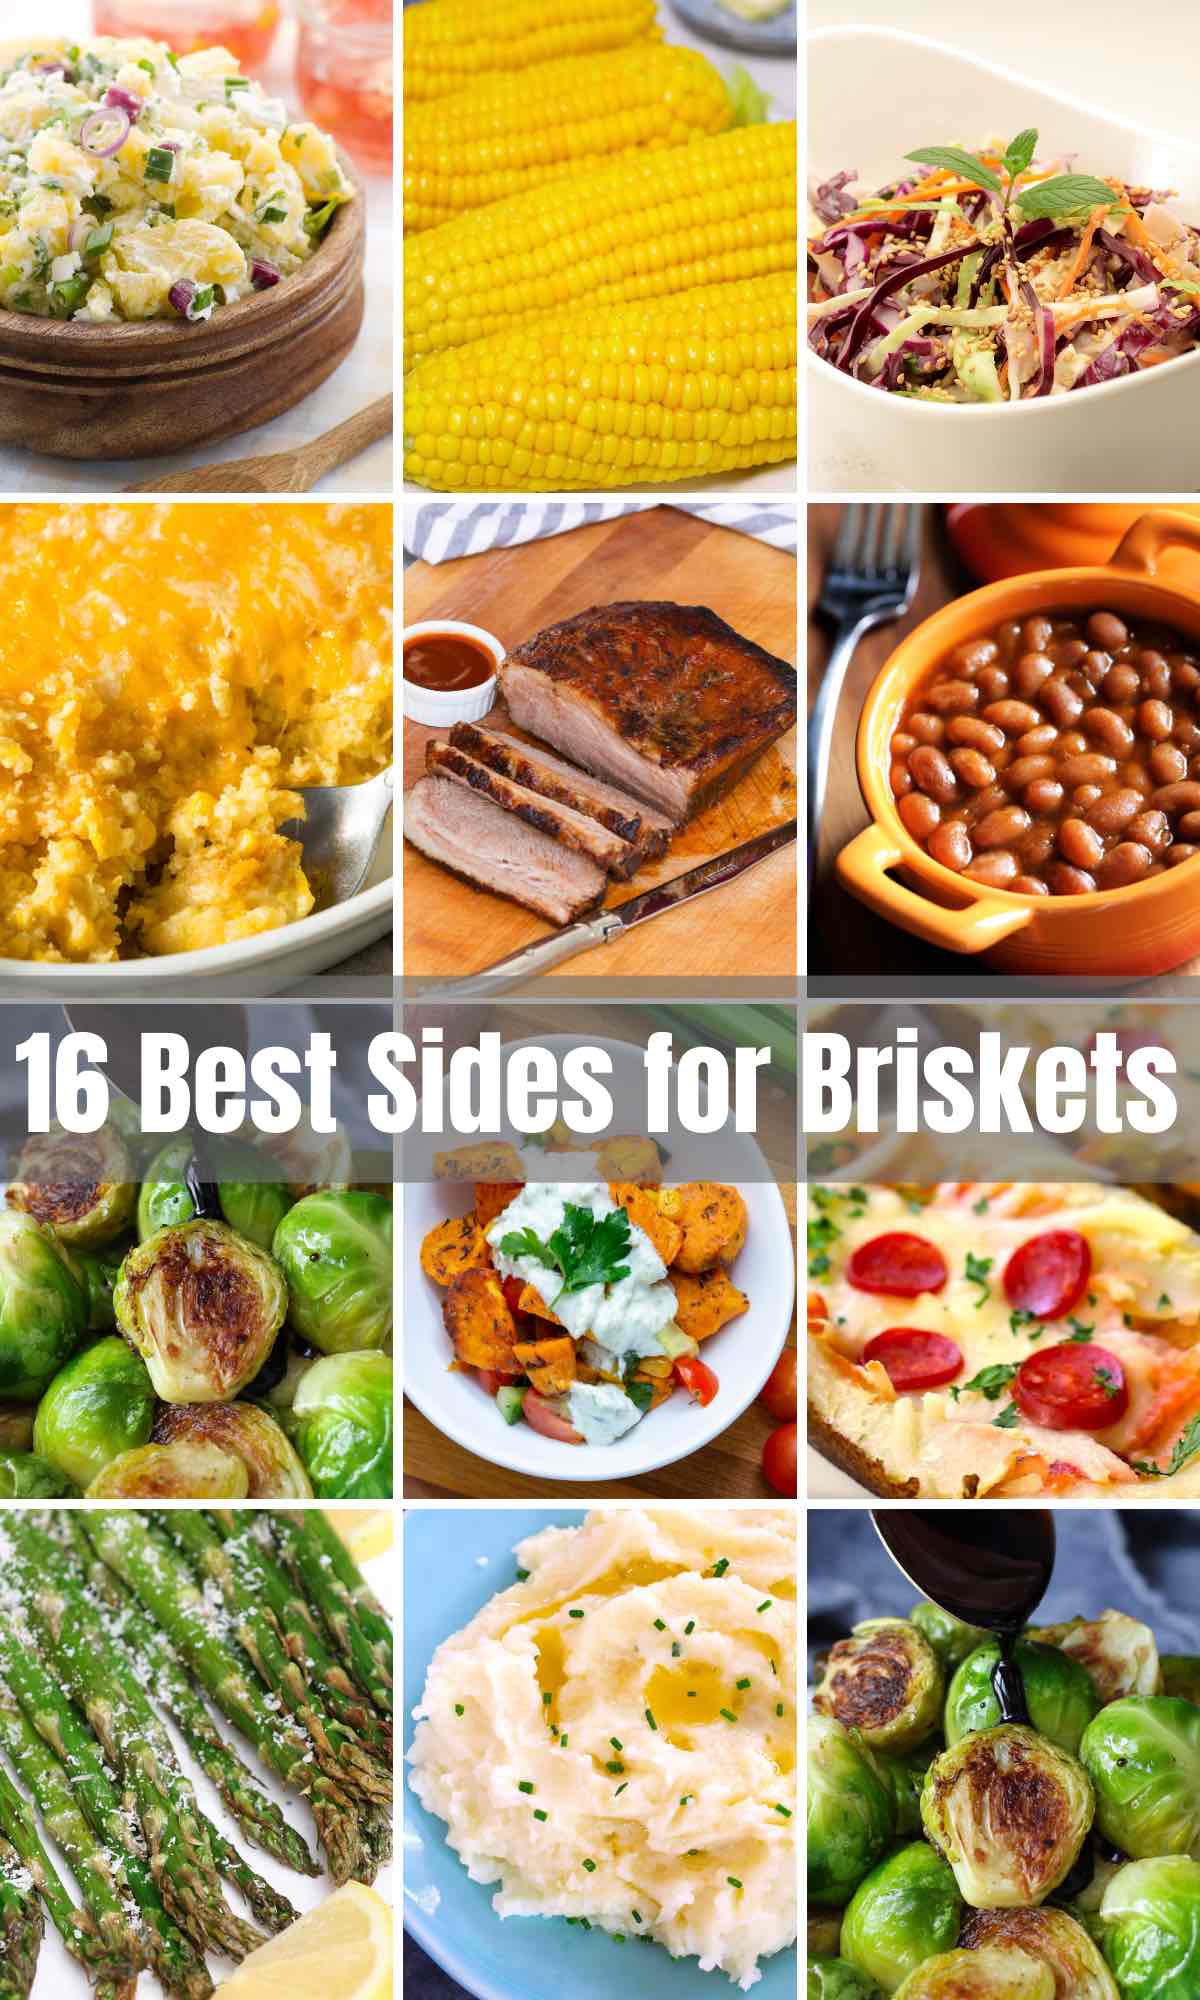 Brisket is one of the most delicious comfort foods you’ll make. The mouth-watering beef brisket is often seasoned with BBQ sauce and always a crowd-pleaser. You’ll never disappoint with our tips on how to serve your beef, especially when choosing one of these 16 Best Side Dishes for Brisket. 